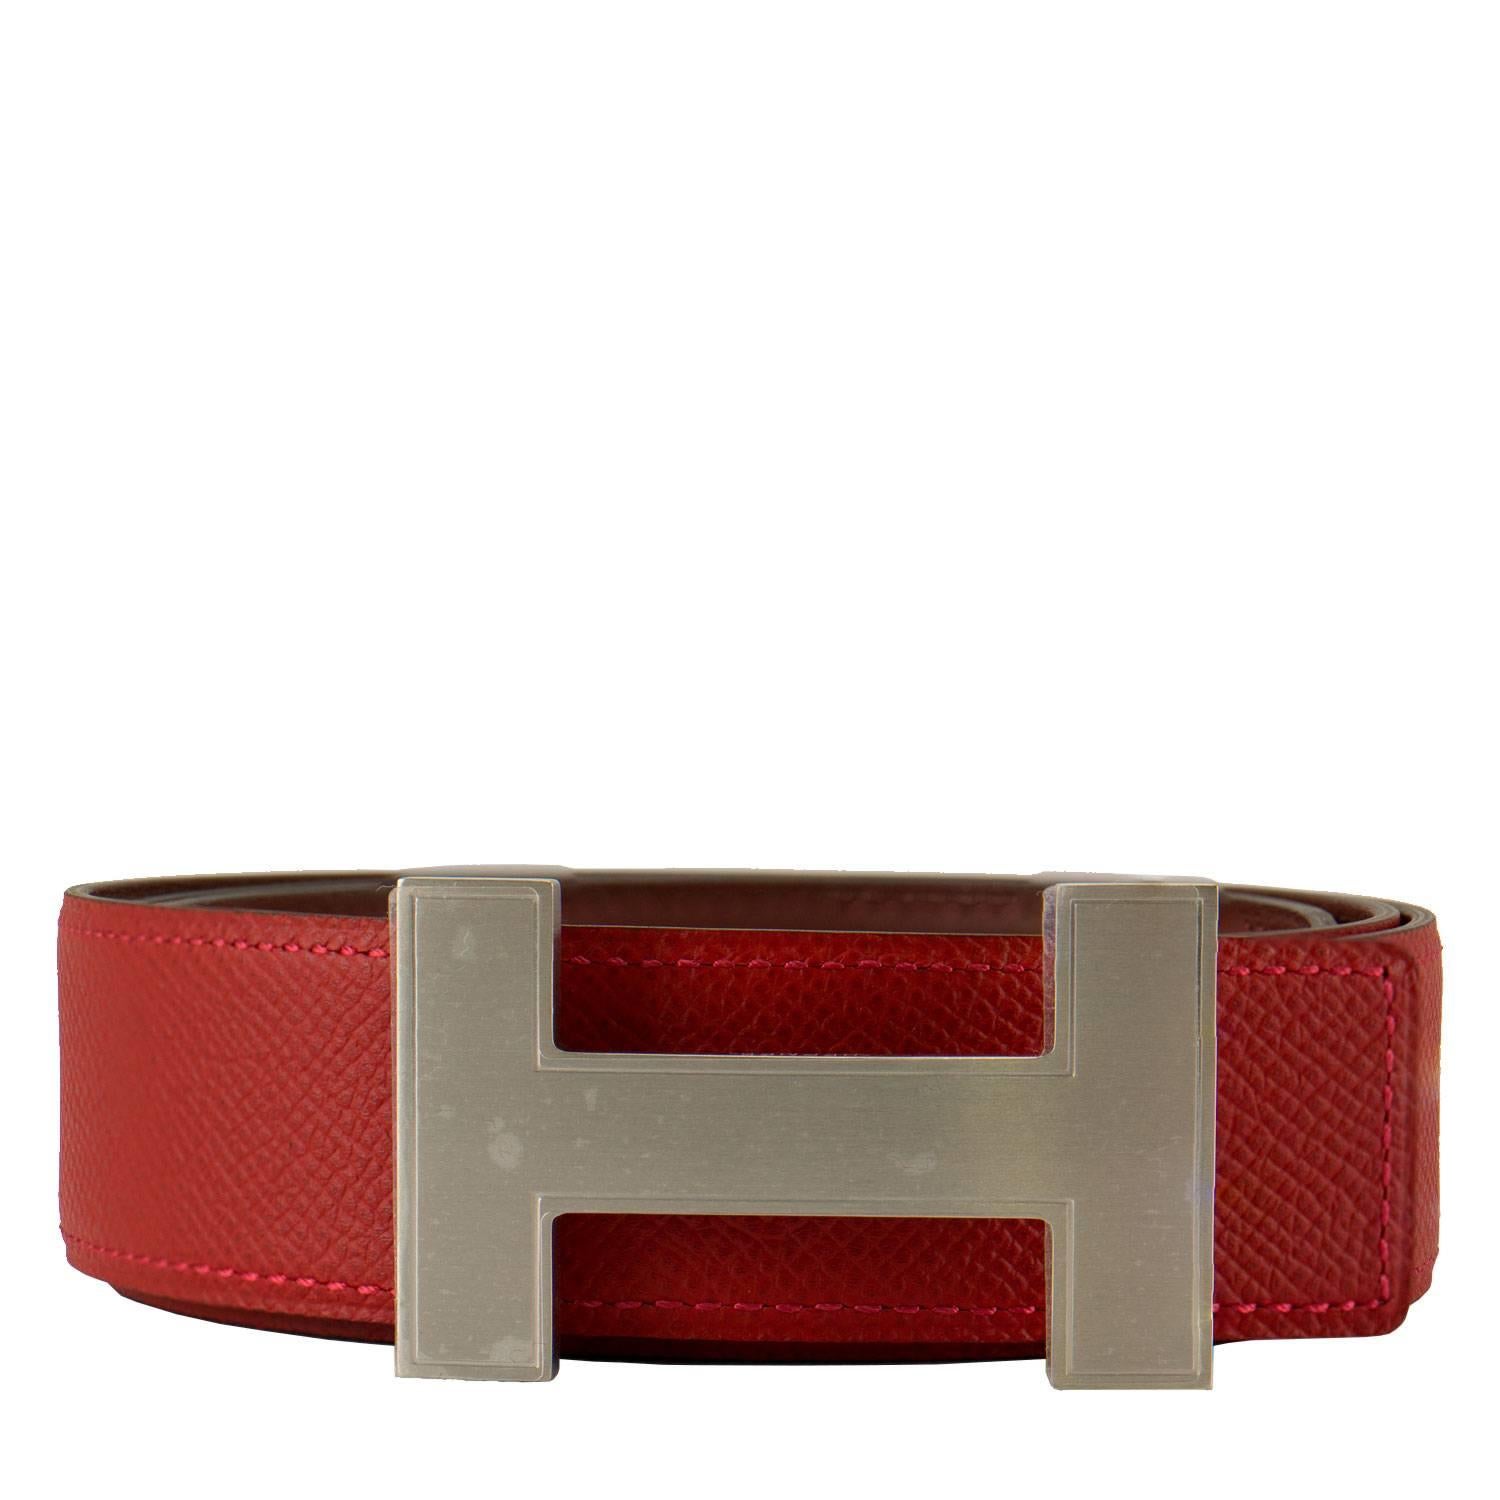 Hermes Men's Reversible Belt H Swift/Epsom Leather Rouge H / Rouge Casaque Color Palladium Hardware 2016

Pristine condition. Pre-owned and never used

Bought it in hermes store in 2016.

This item has a price on Boutique Hermes $815.00.

Color: 